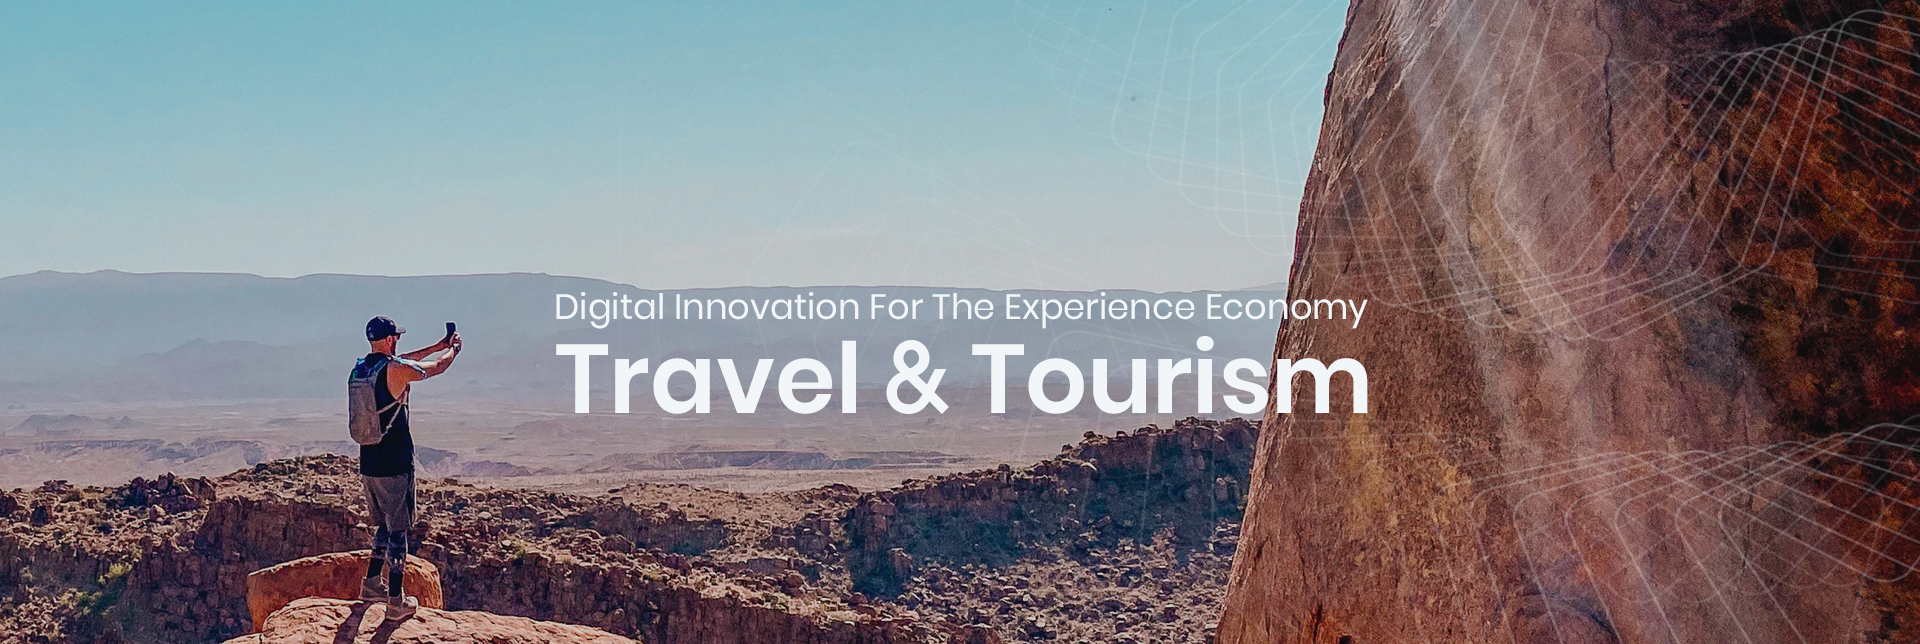 Digital Innovation for the Experience Economy: Travel & Tourism